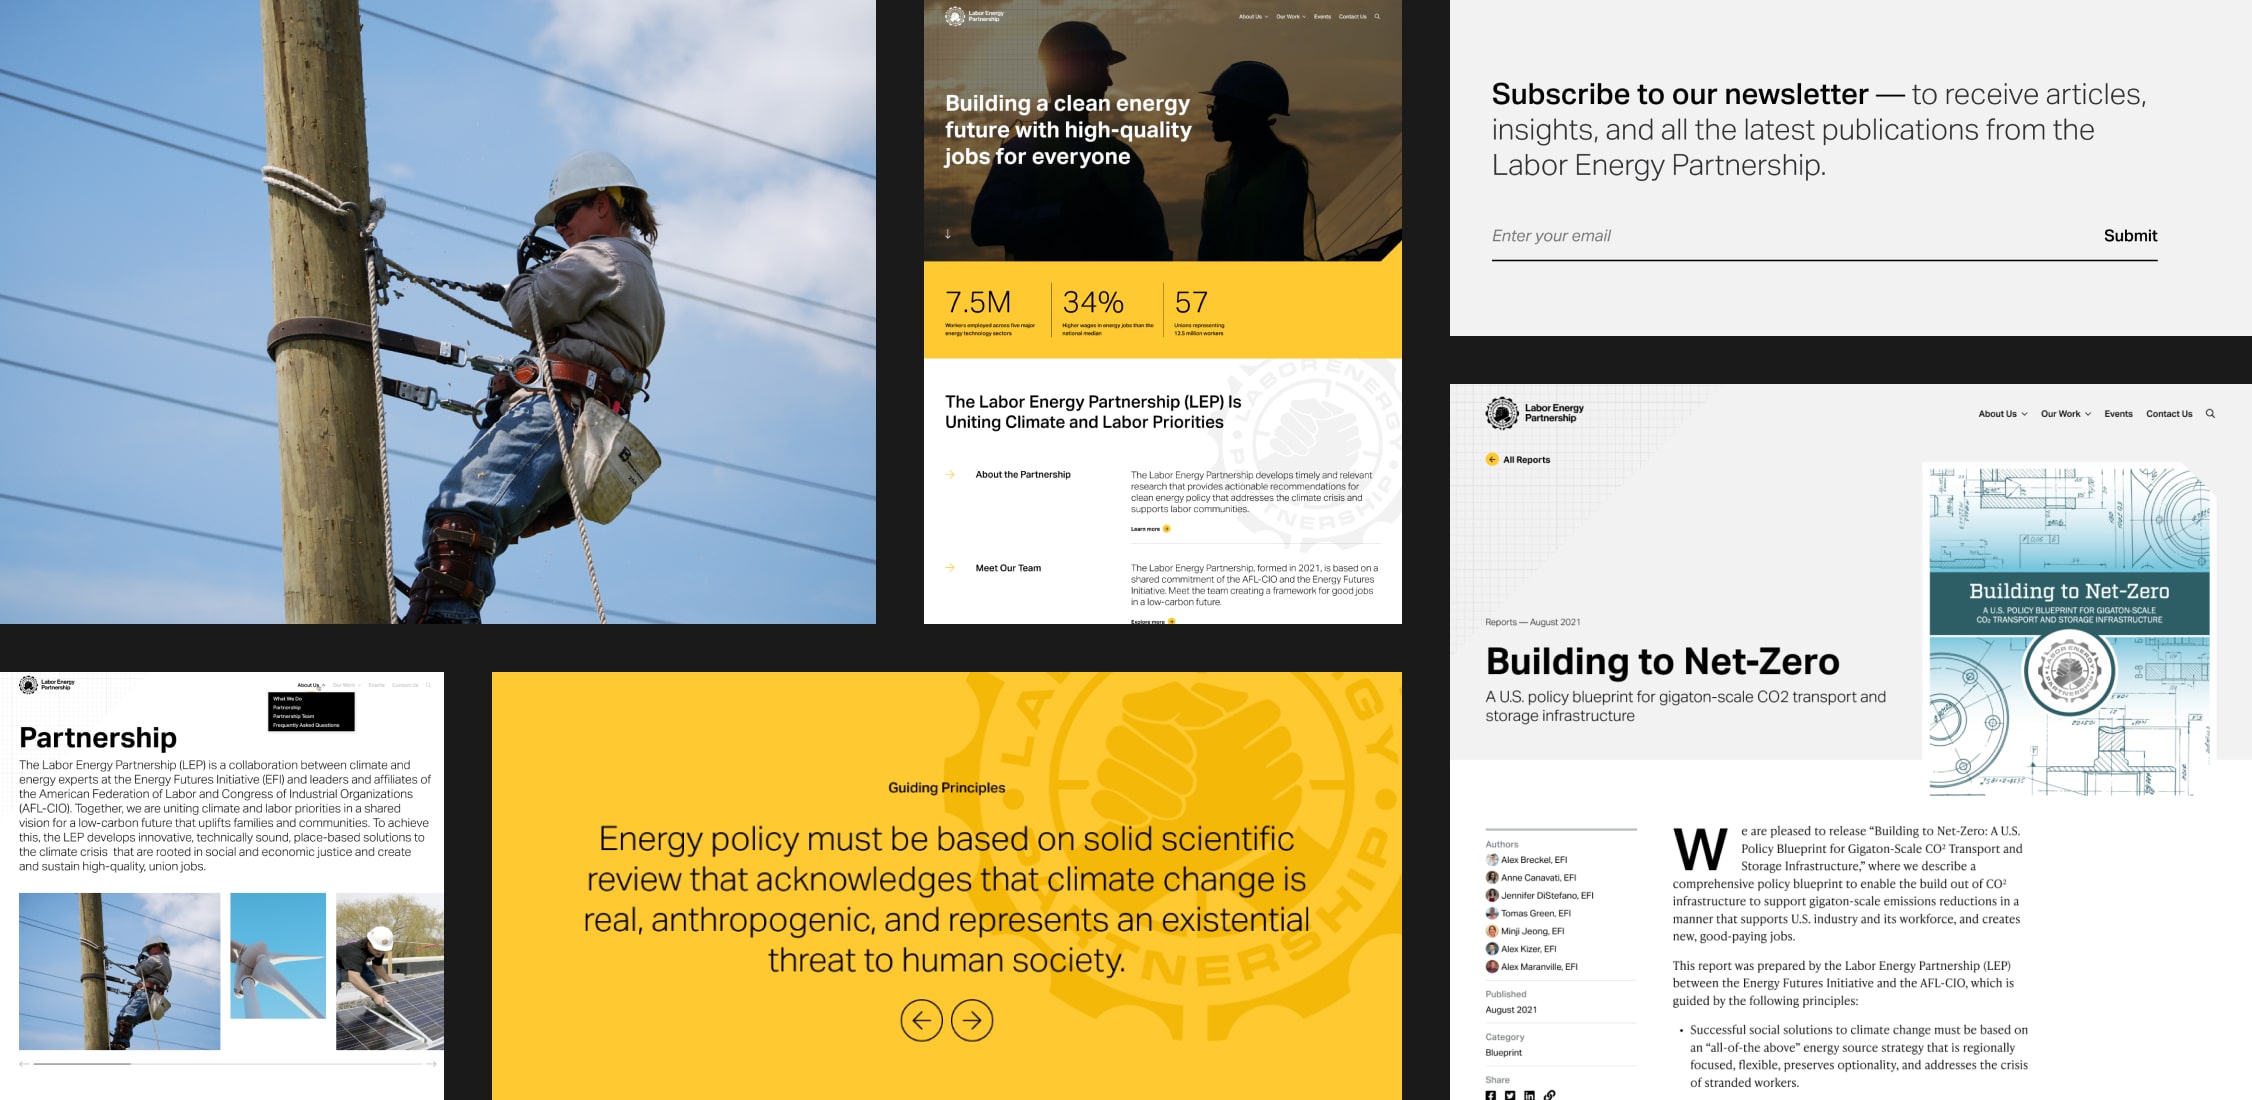 Interface images for labor energy partnership's website